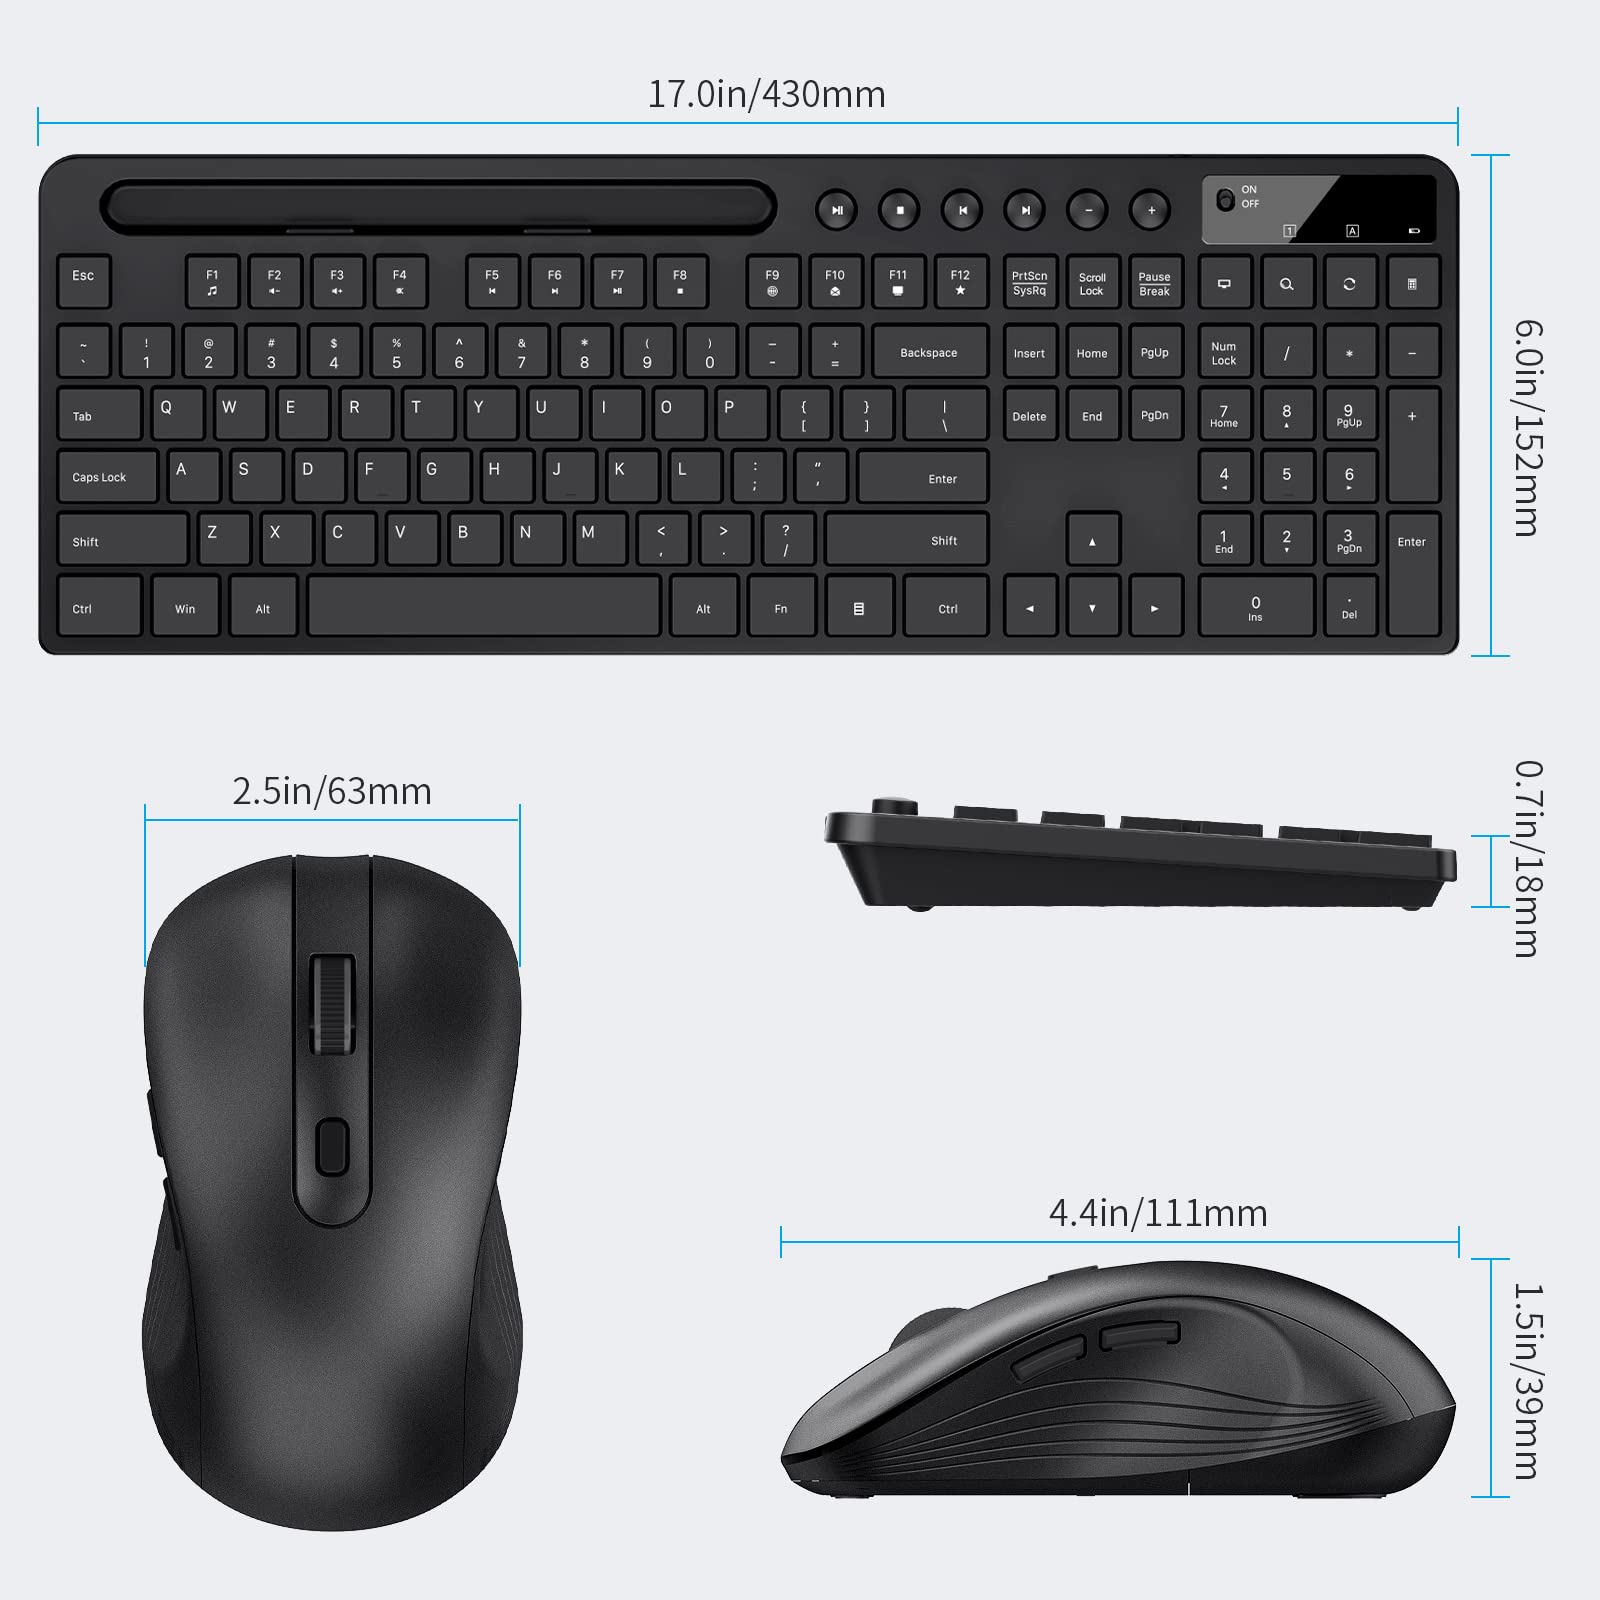 Wireless Keyboard and Mouse Combo, MARVO 2.4G Ergonomic Wireless Computer Keyboard with Phone Tablet Holder, Silent Mouse with 6 Button, Compatible with MacBook, Windows (Black)